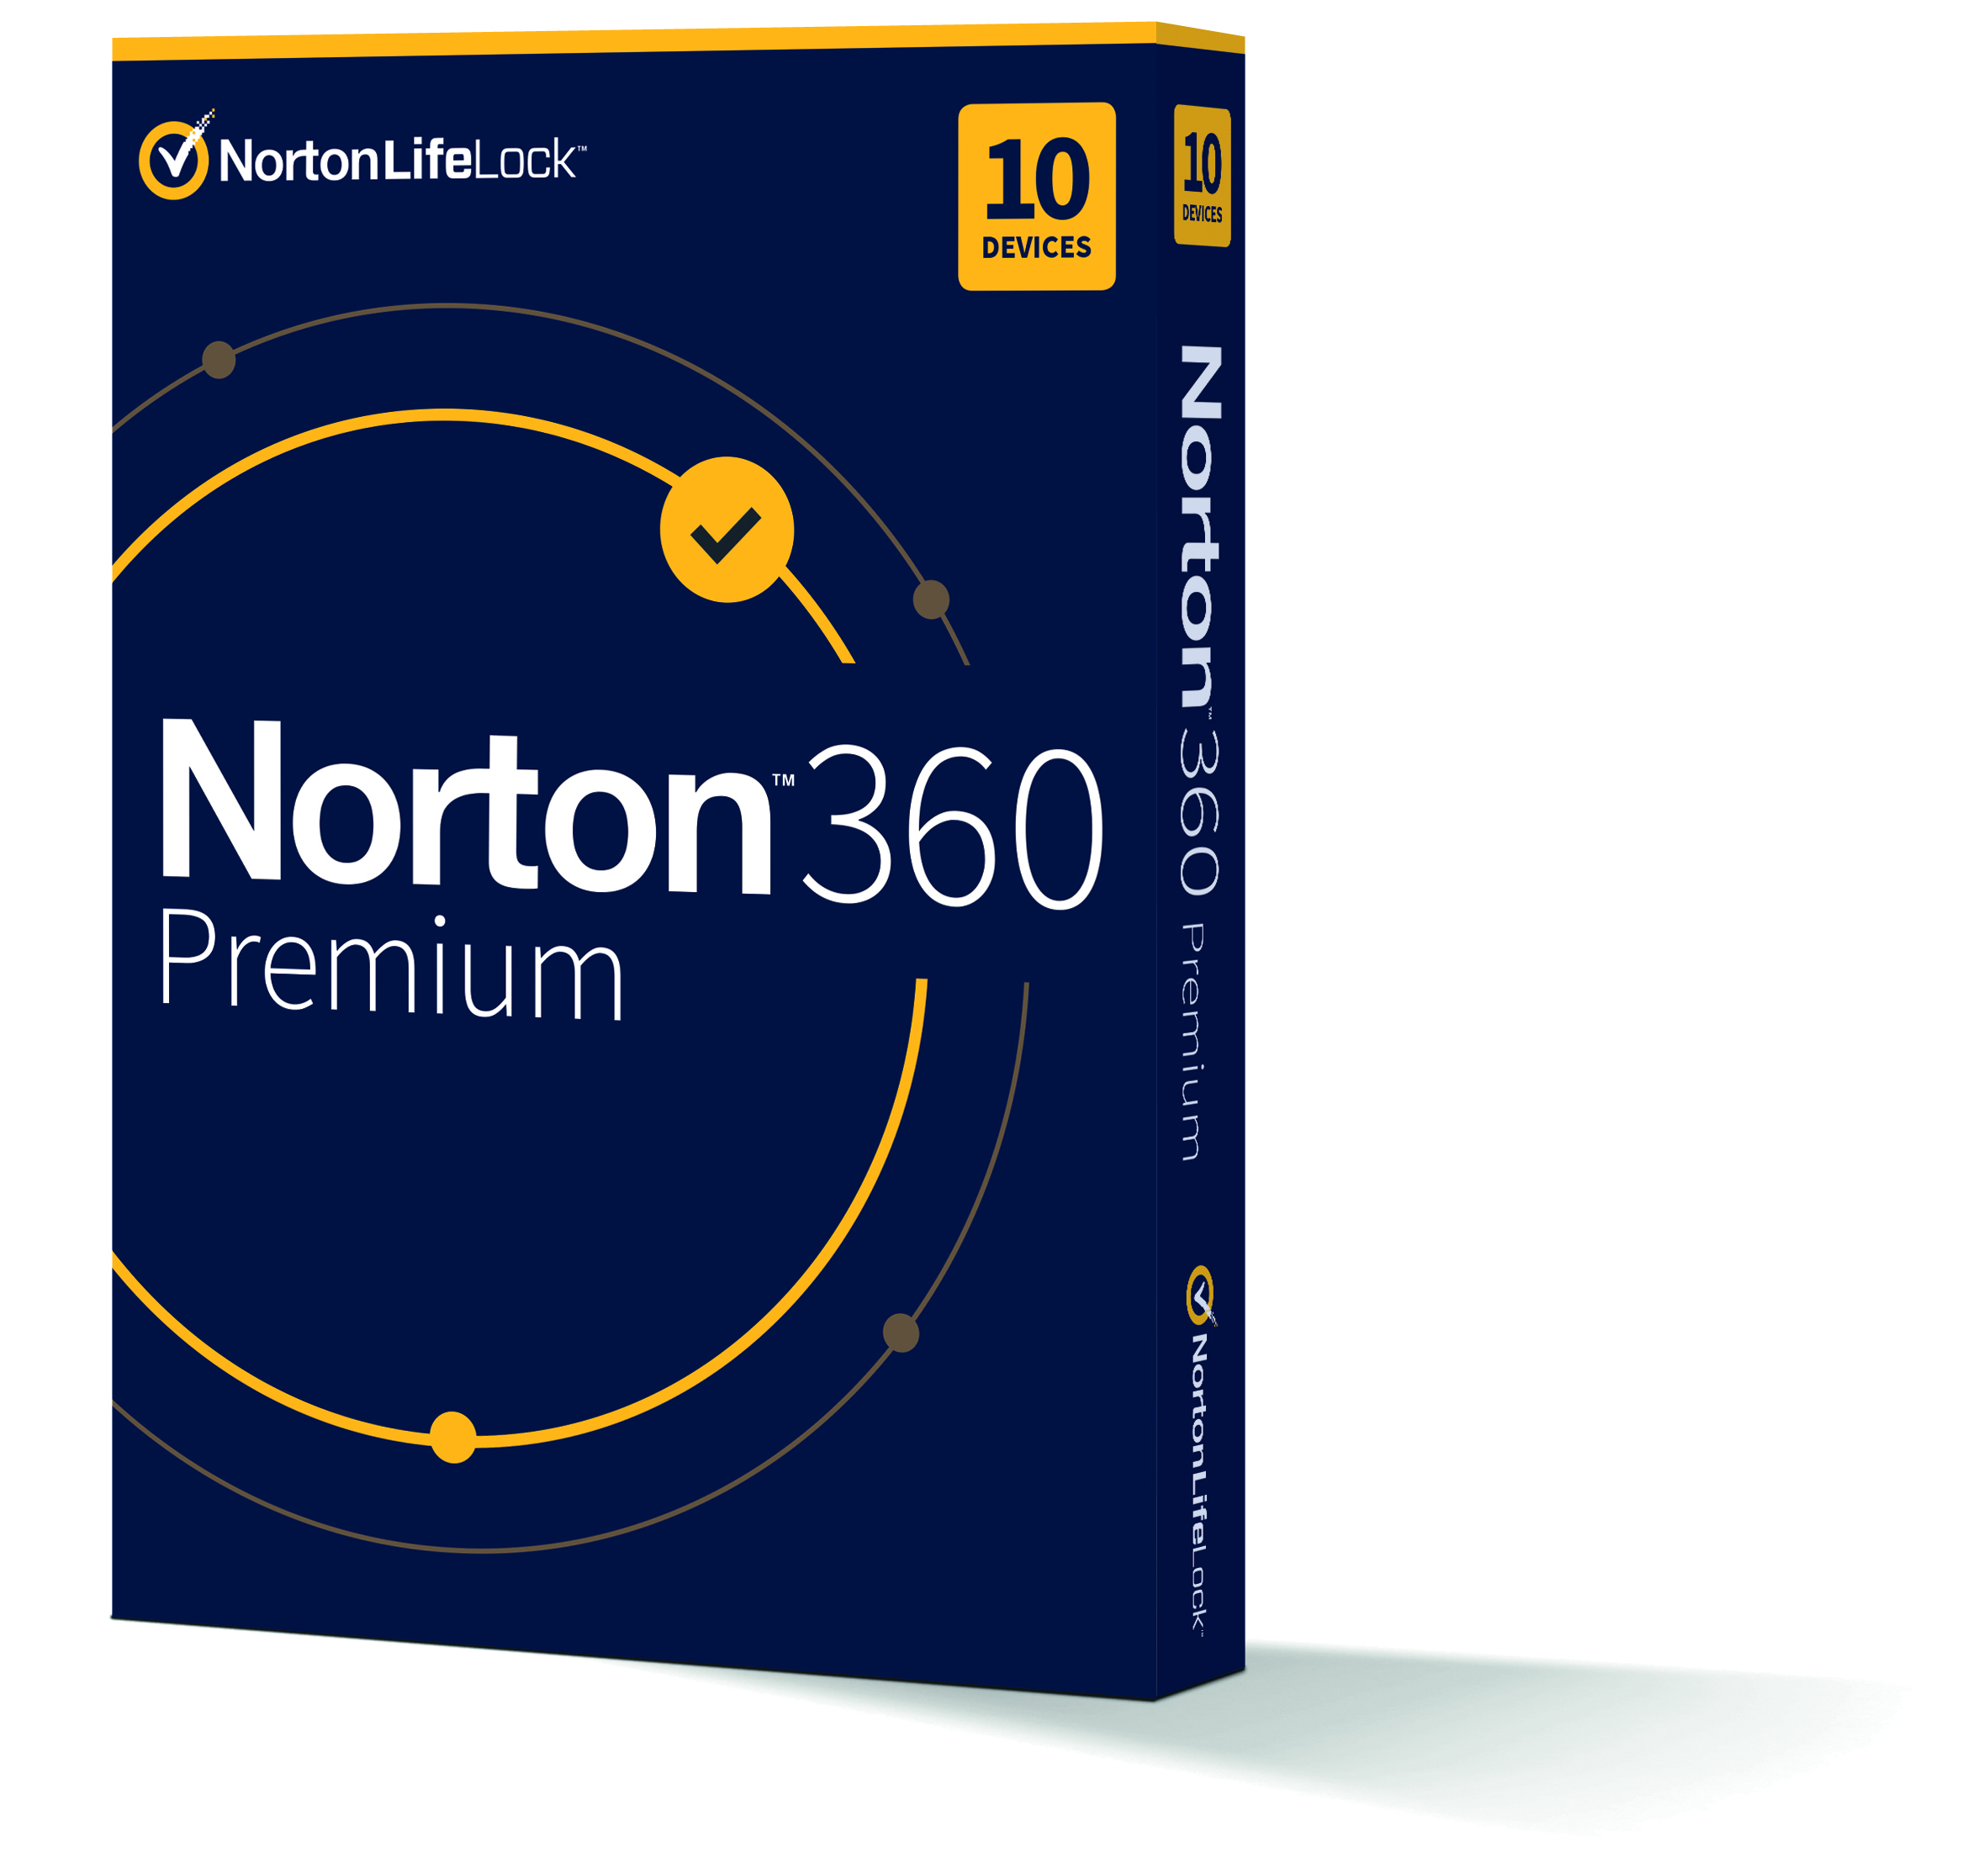 Norton™ 360 Premium I covers up to 10 devices